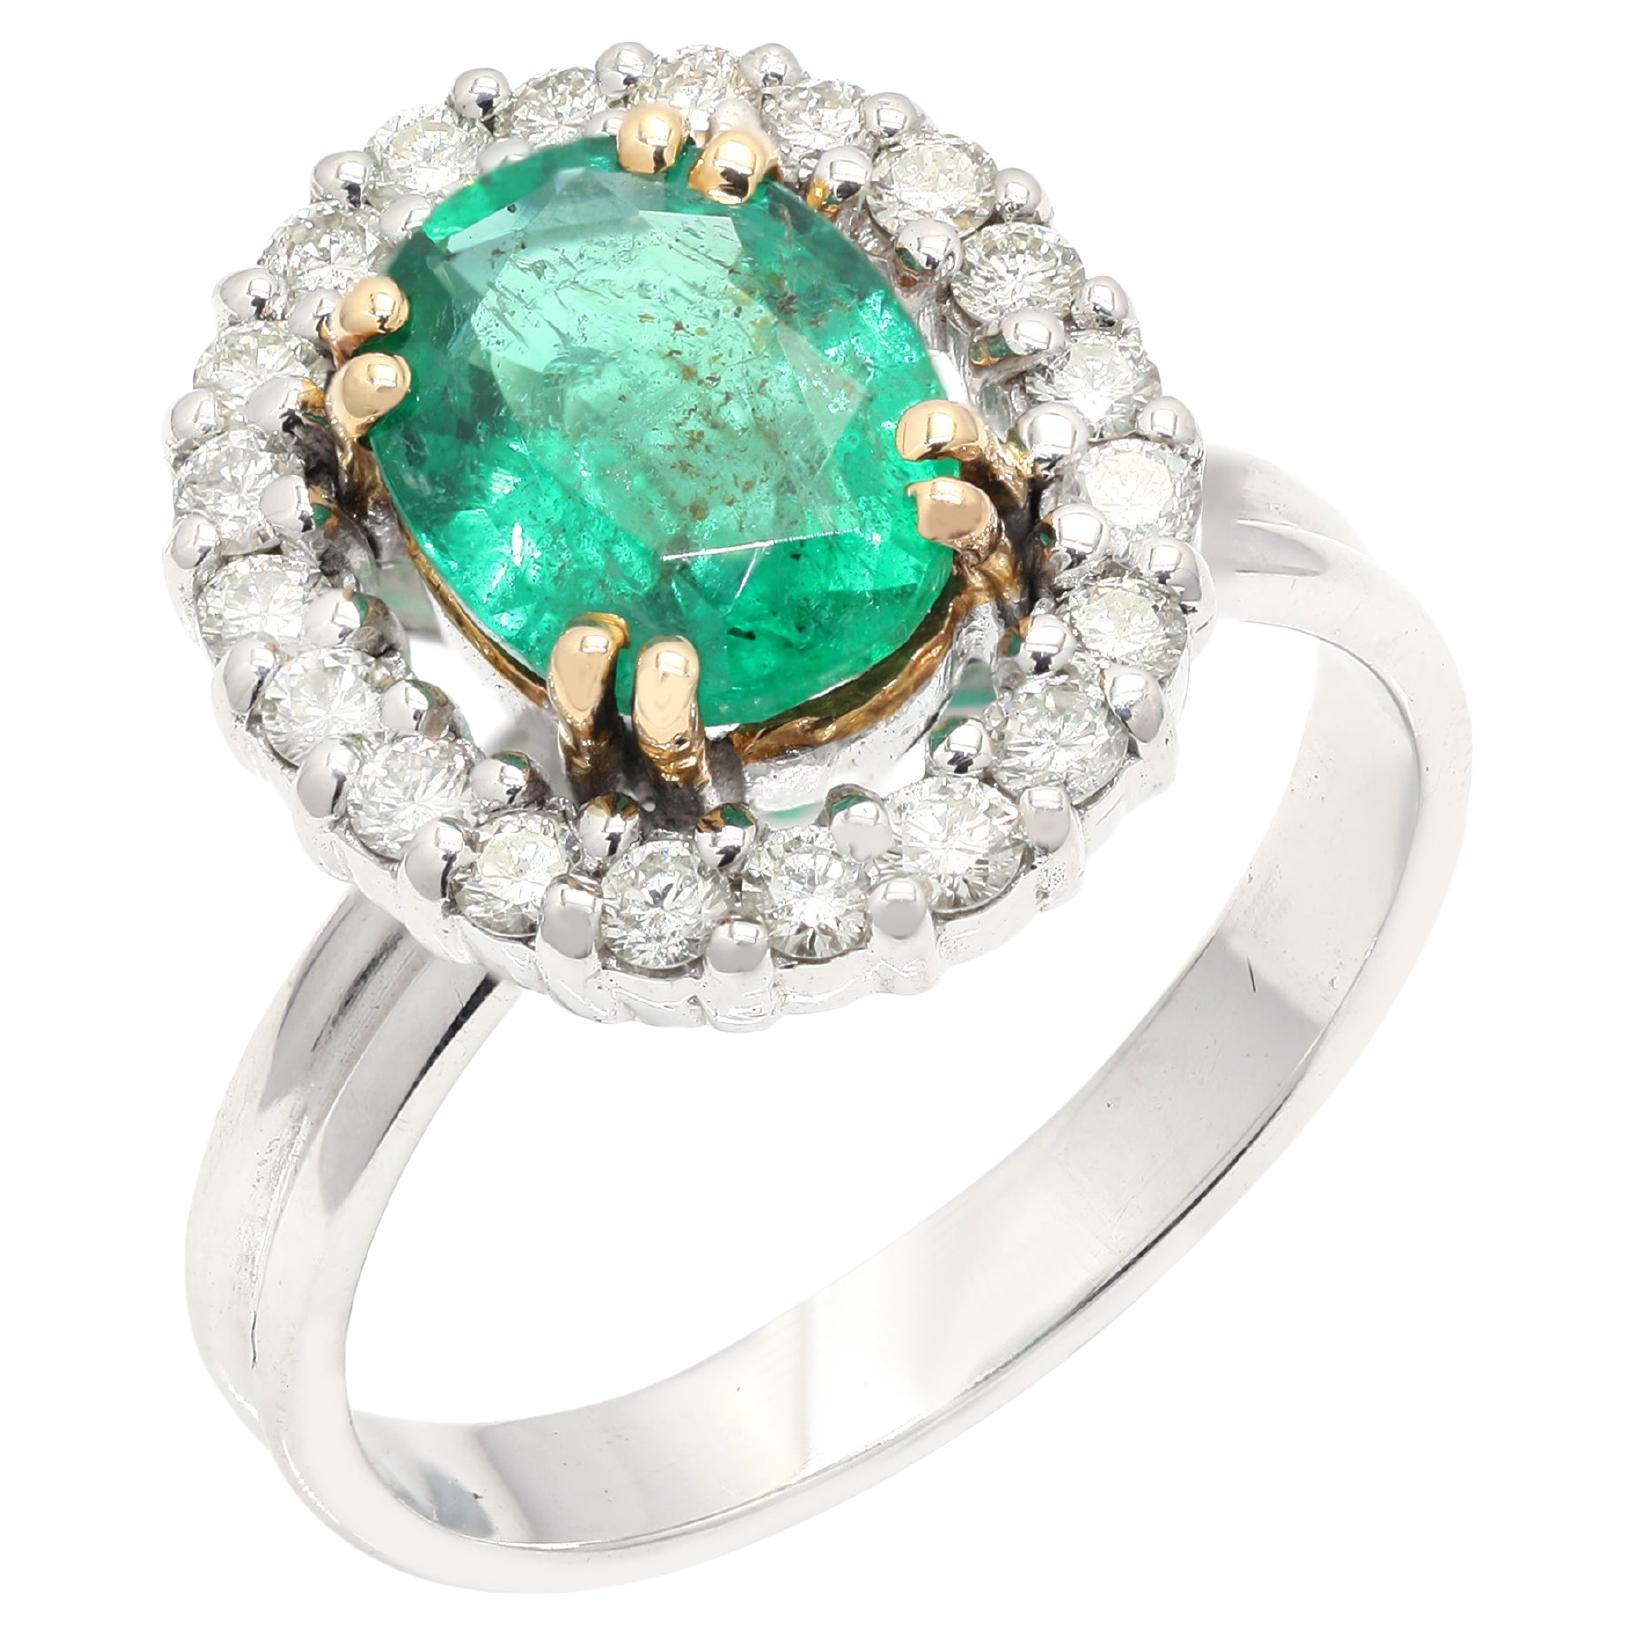 Genuine Diamond and Emerald Wedding Ring Embedded in 18K White Gold